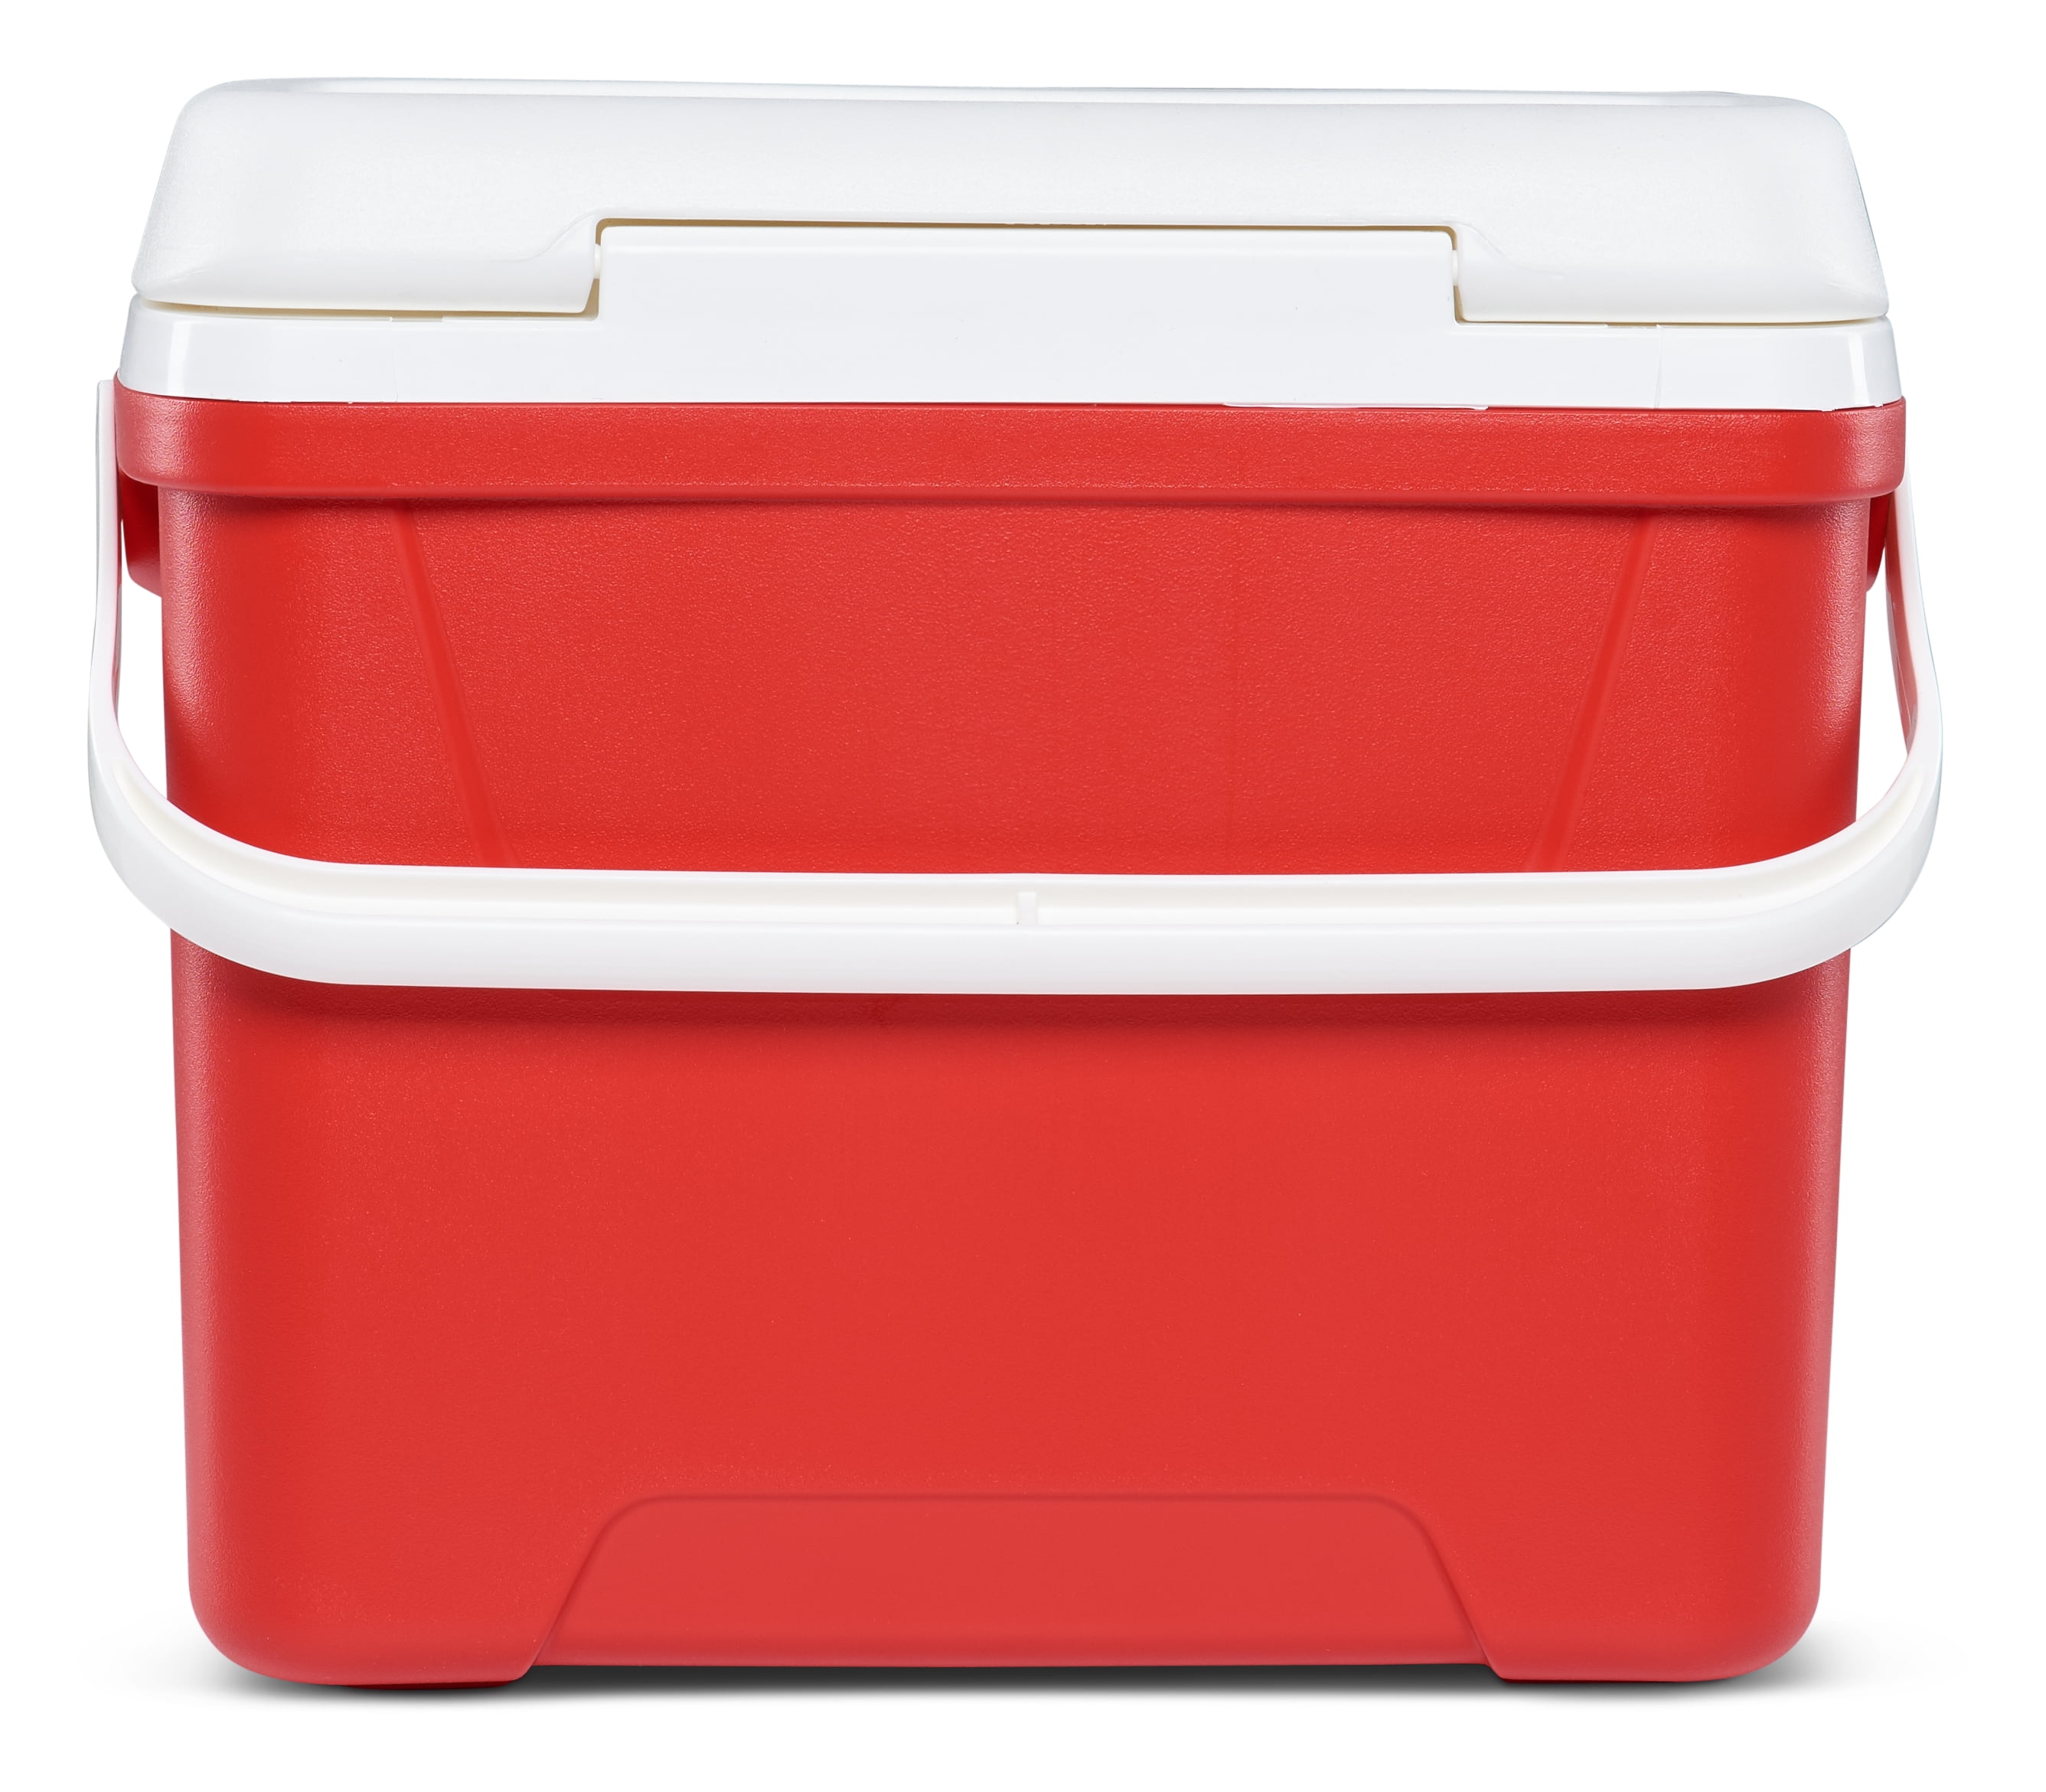 Kansas City Chiefs IGLOO 28-Can Tote Cooler - Red